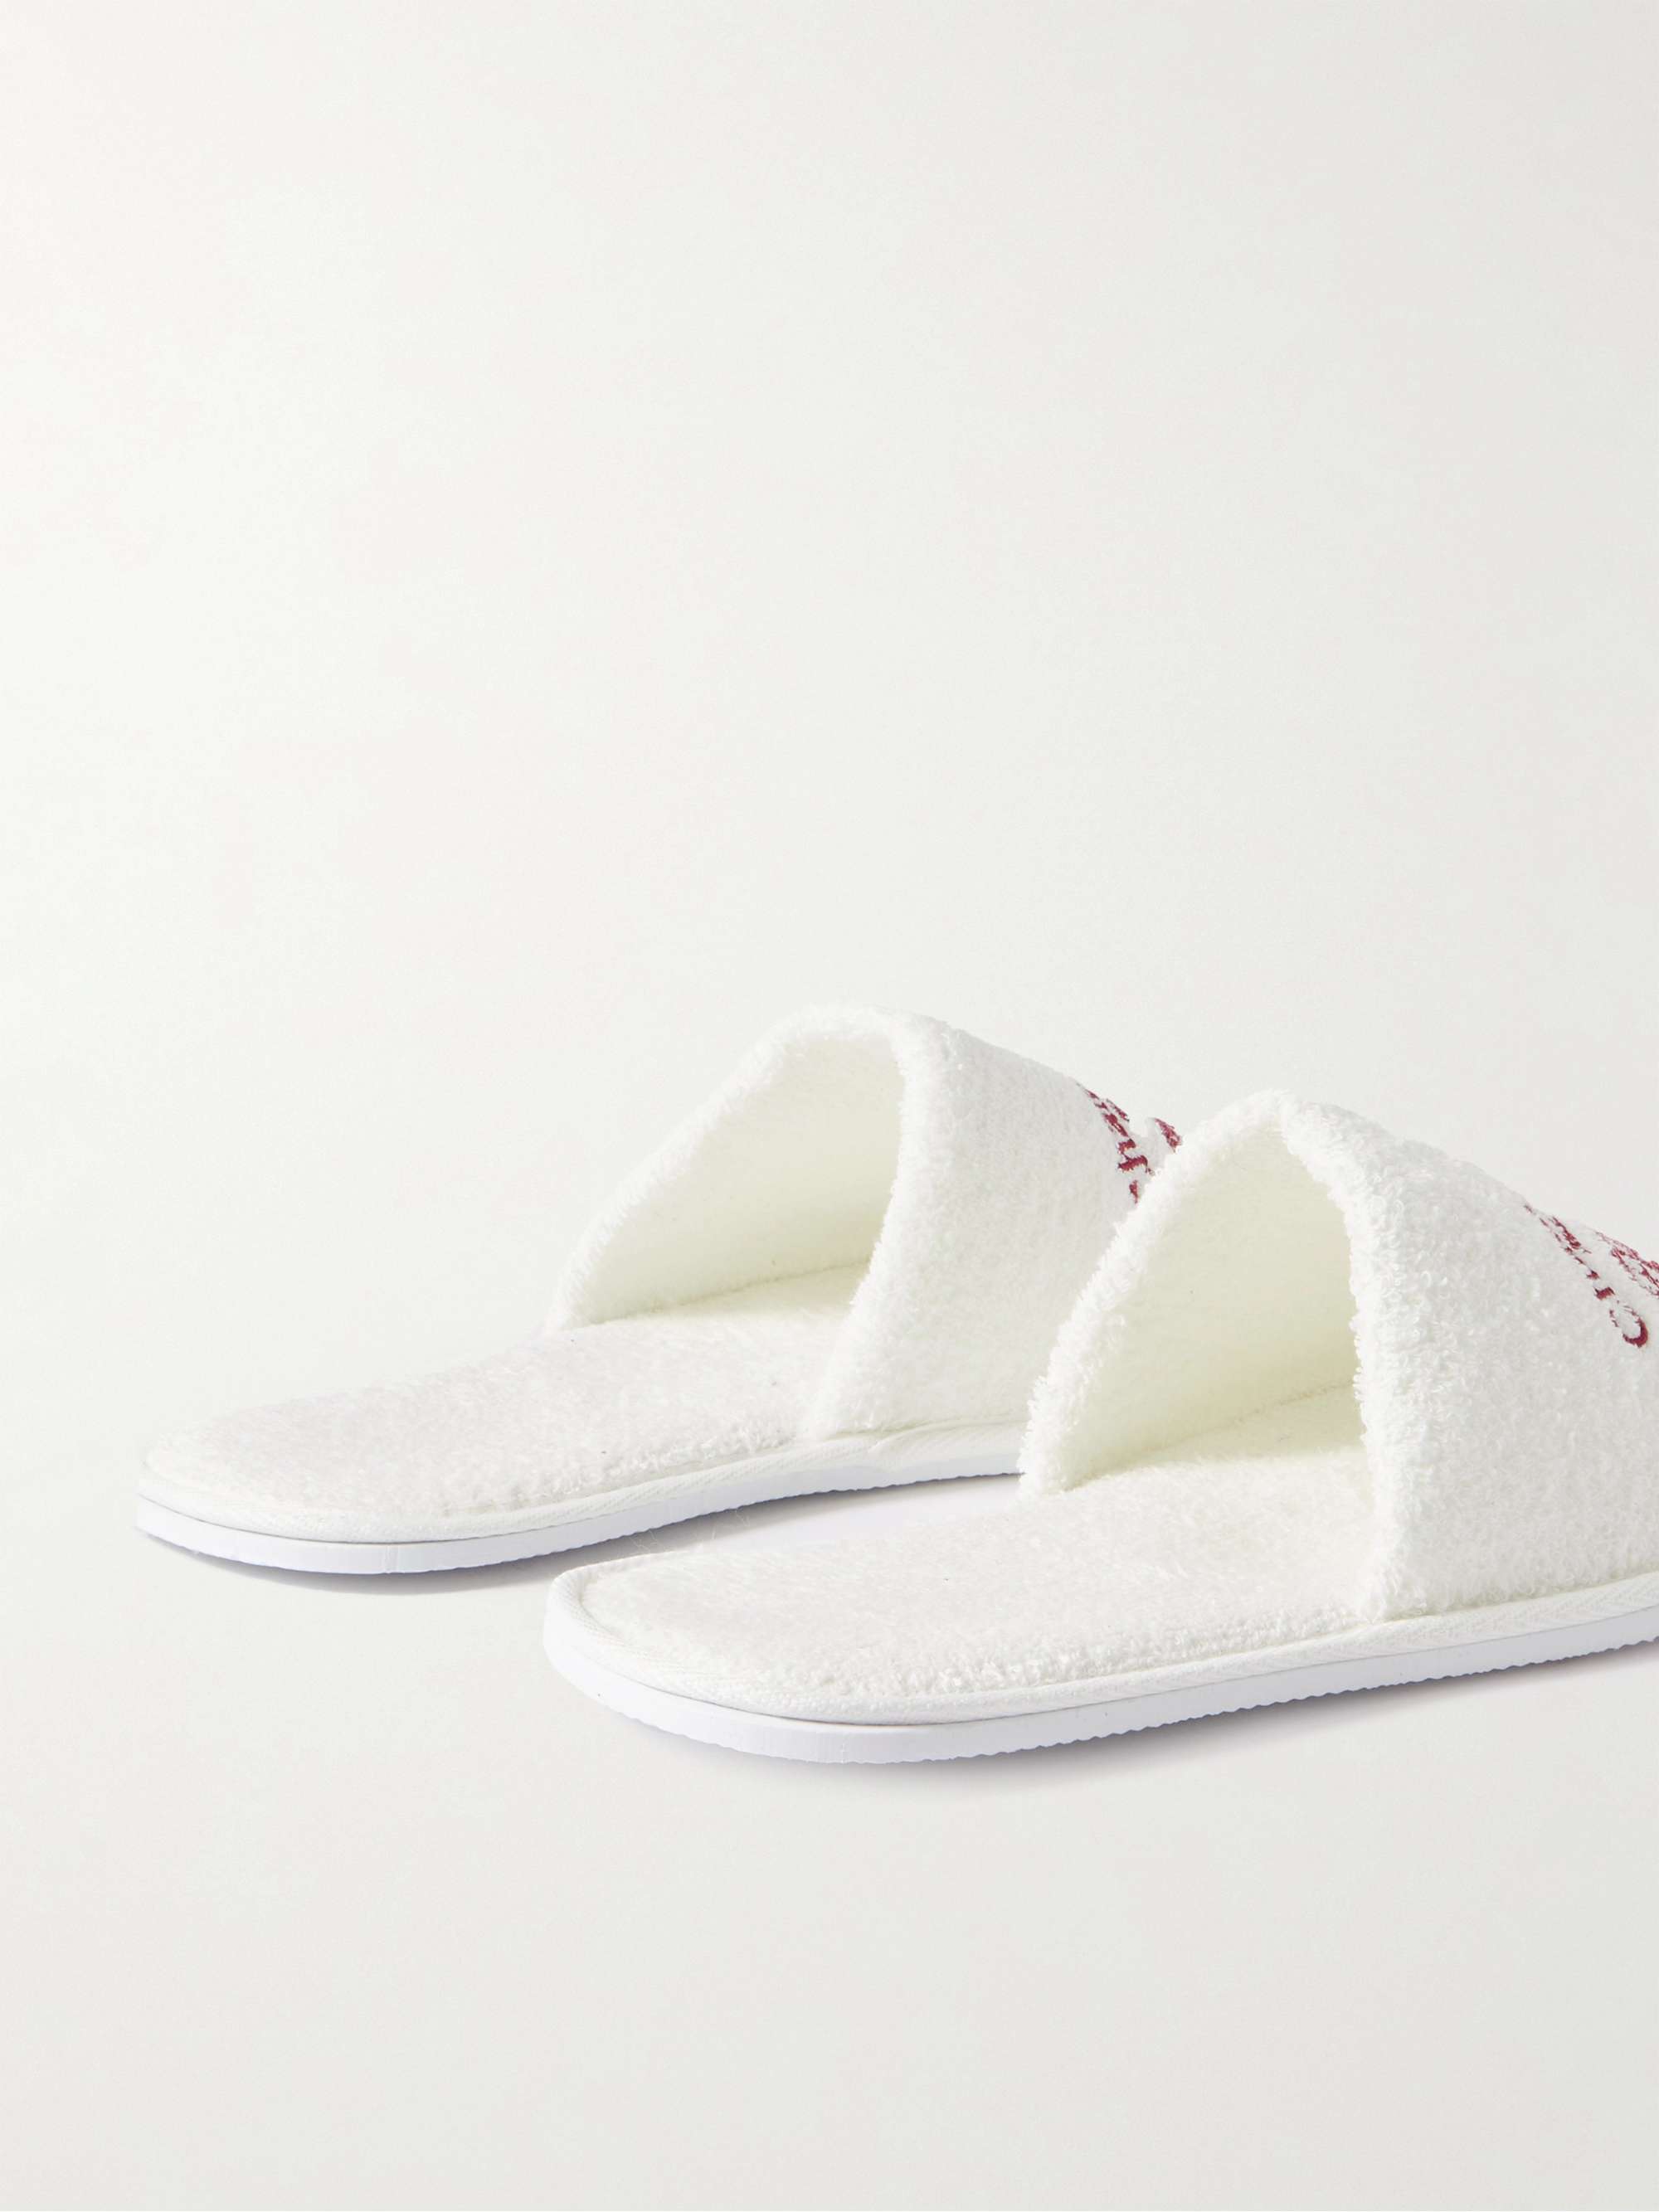 GALLERY DEPT. Chateau Josué Embroidered Terry Slippers